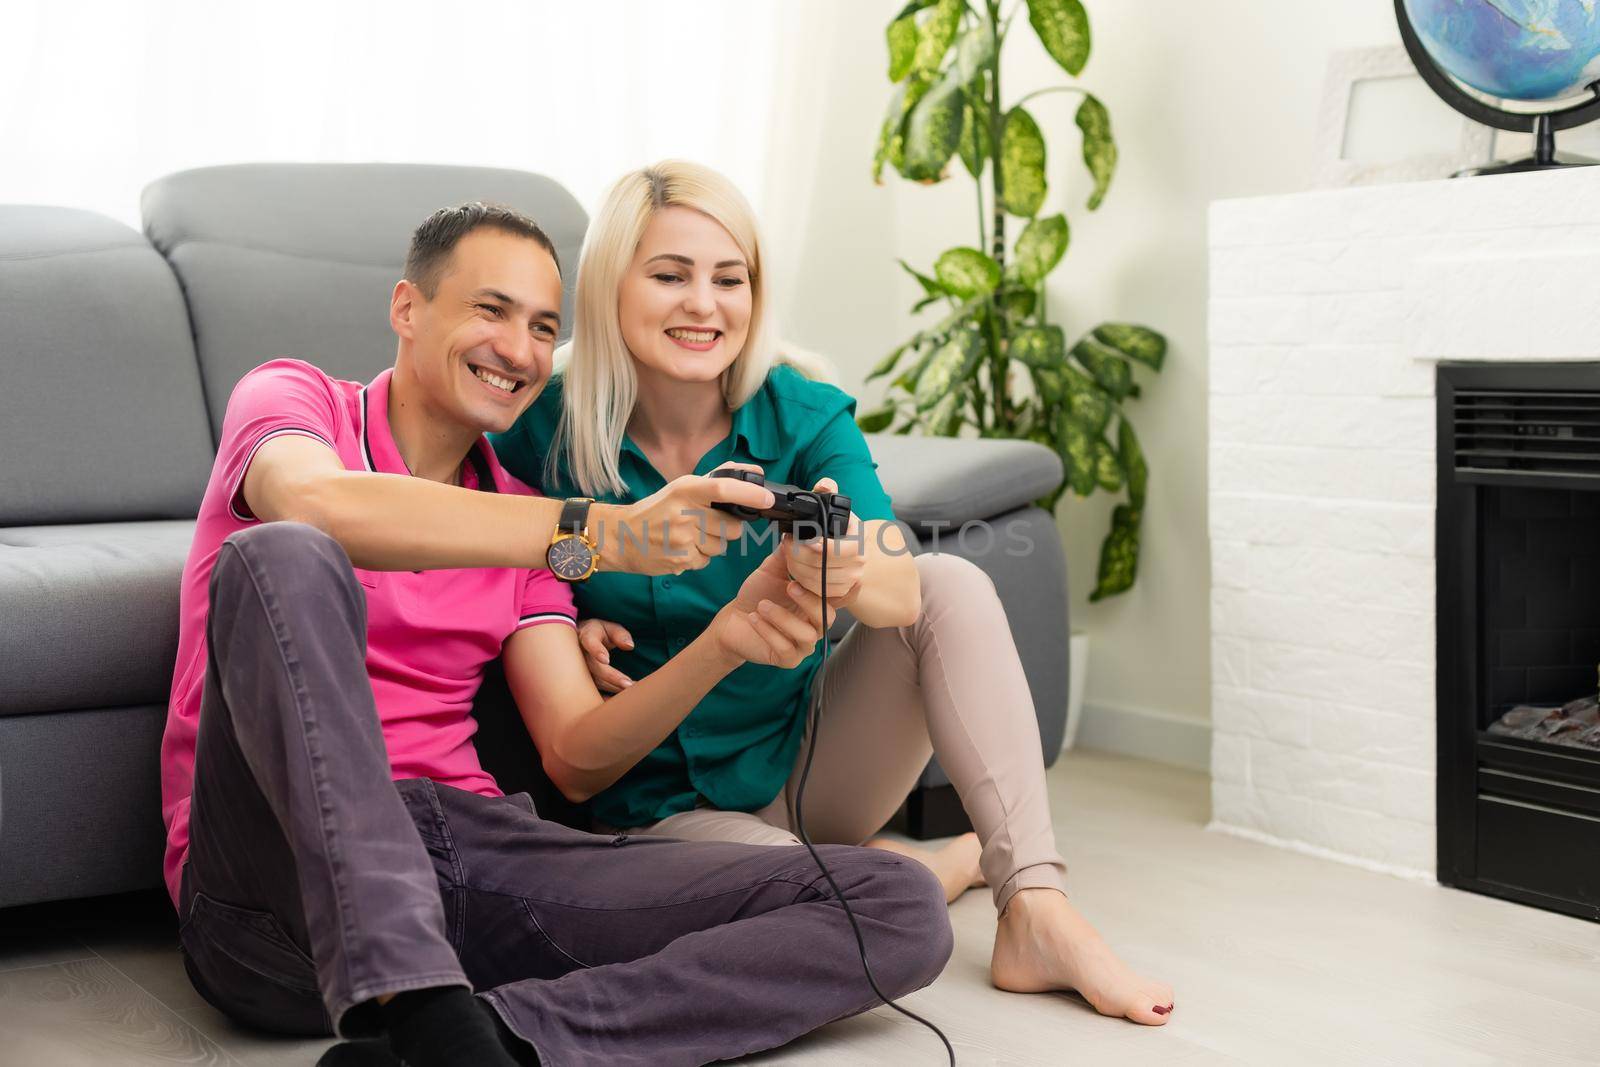 Man and woman playing video games with joystick at home. by Andelov13